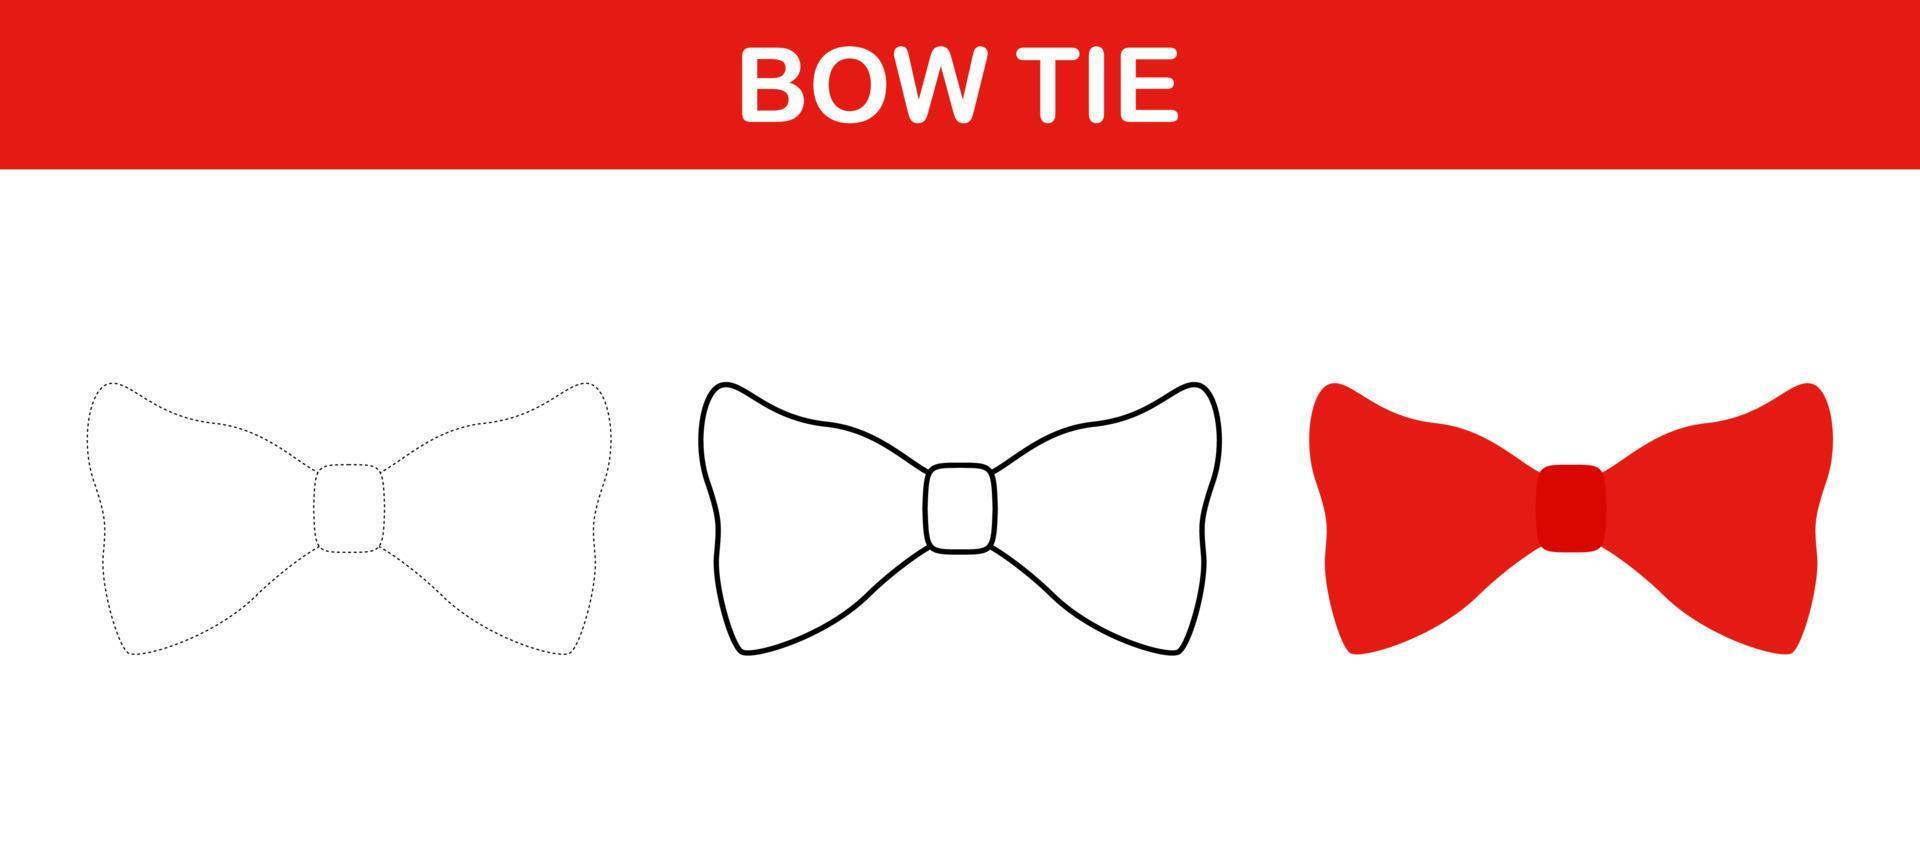 Bow Tie tracing and coloring worksheet for kids vector